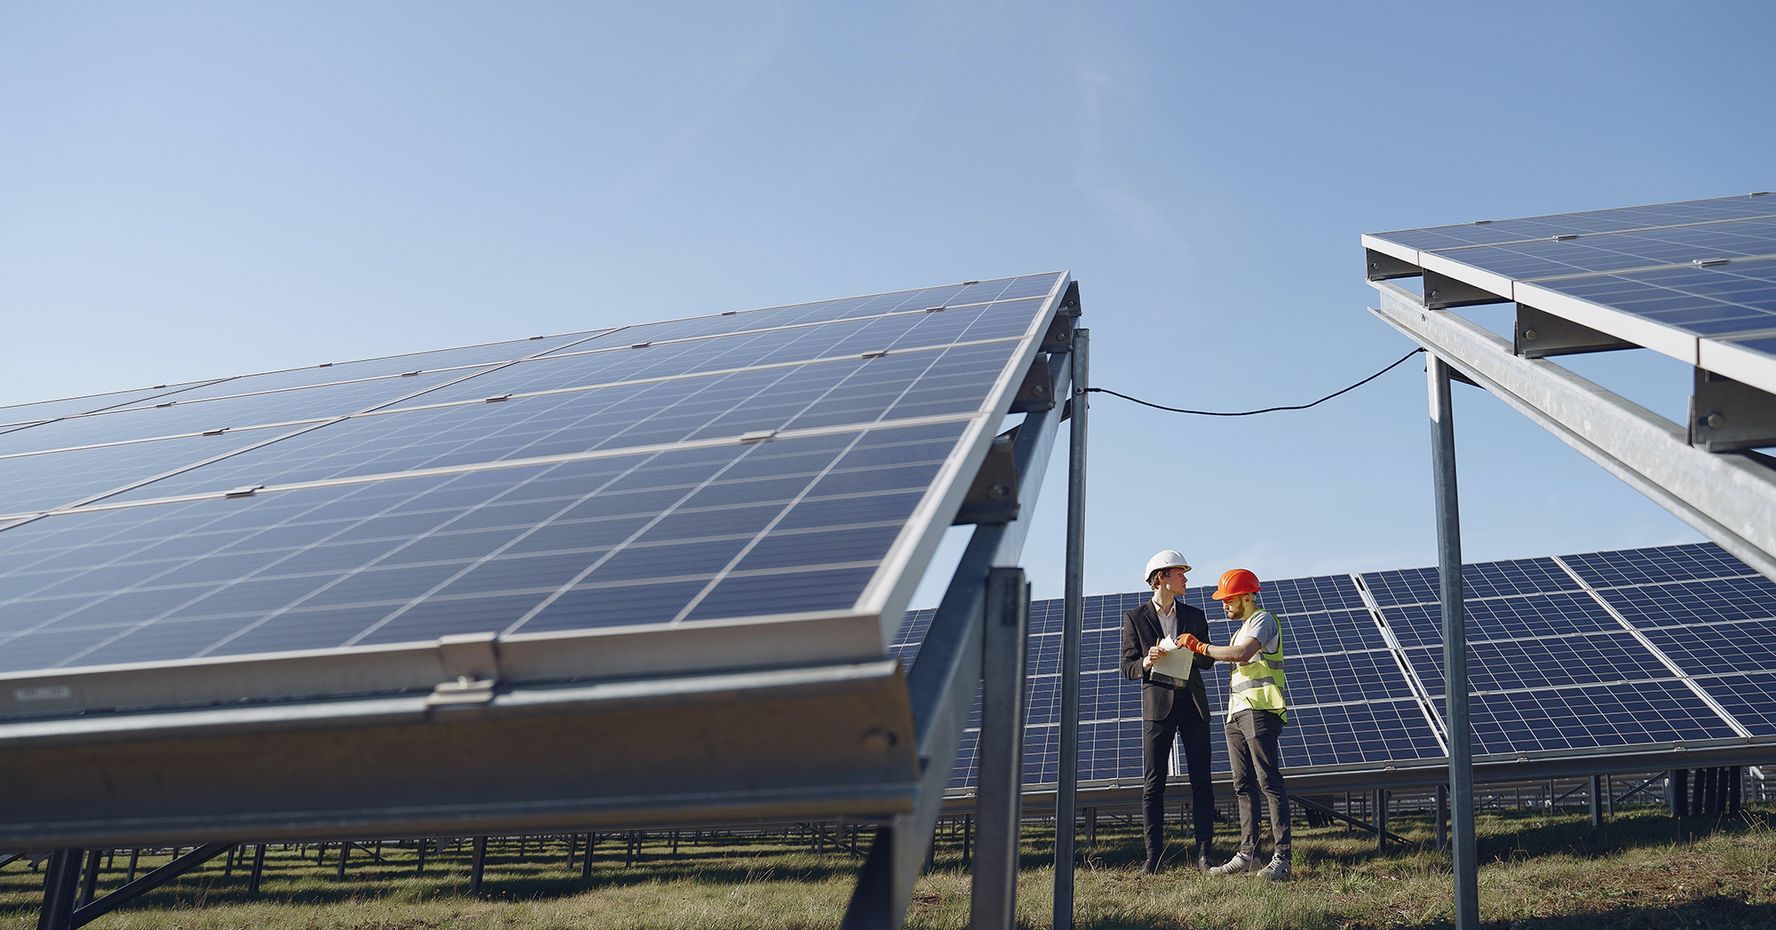 Two people stand in a field of large solar panels.